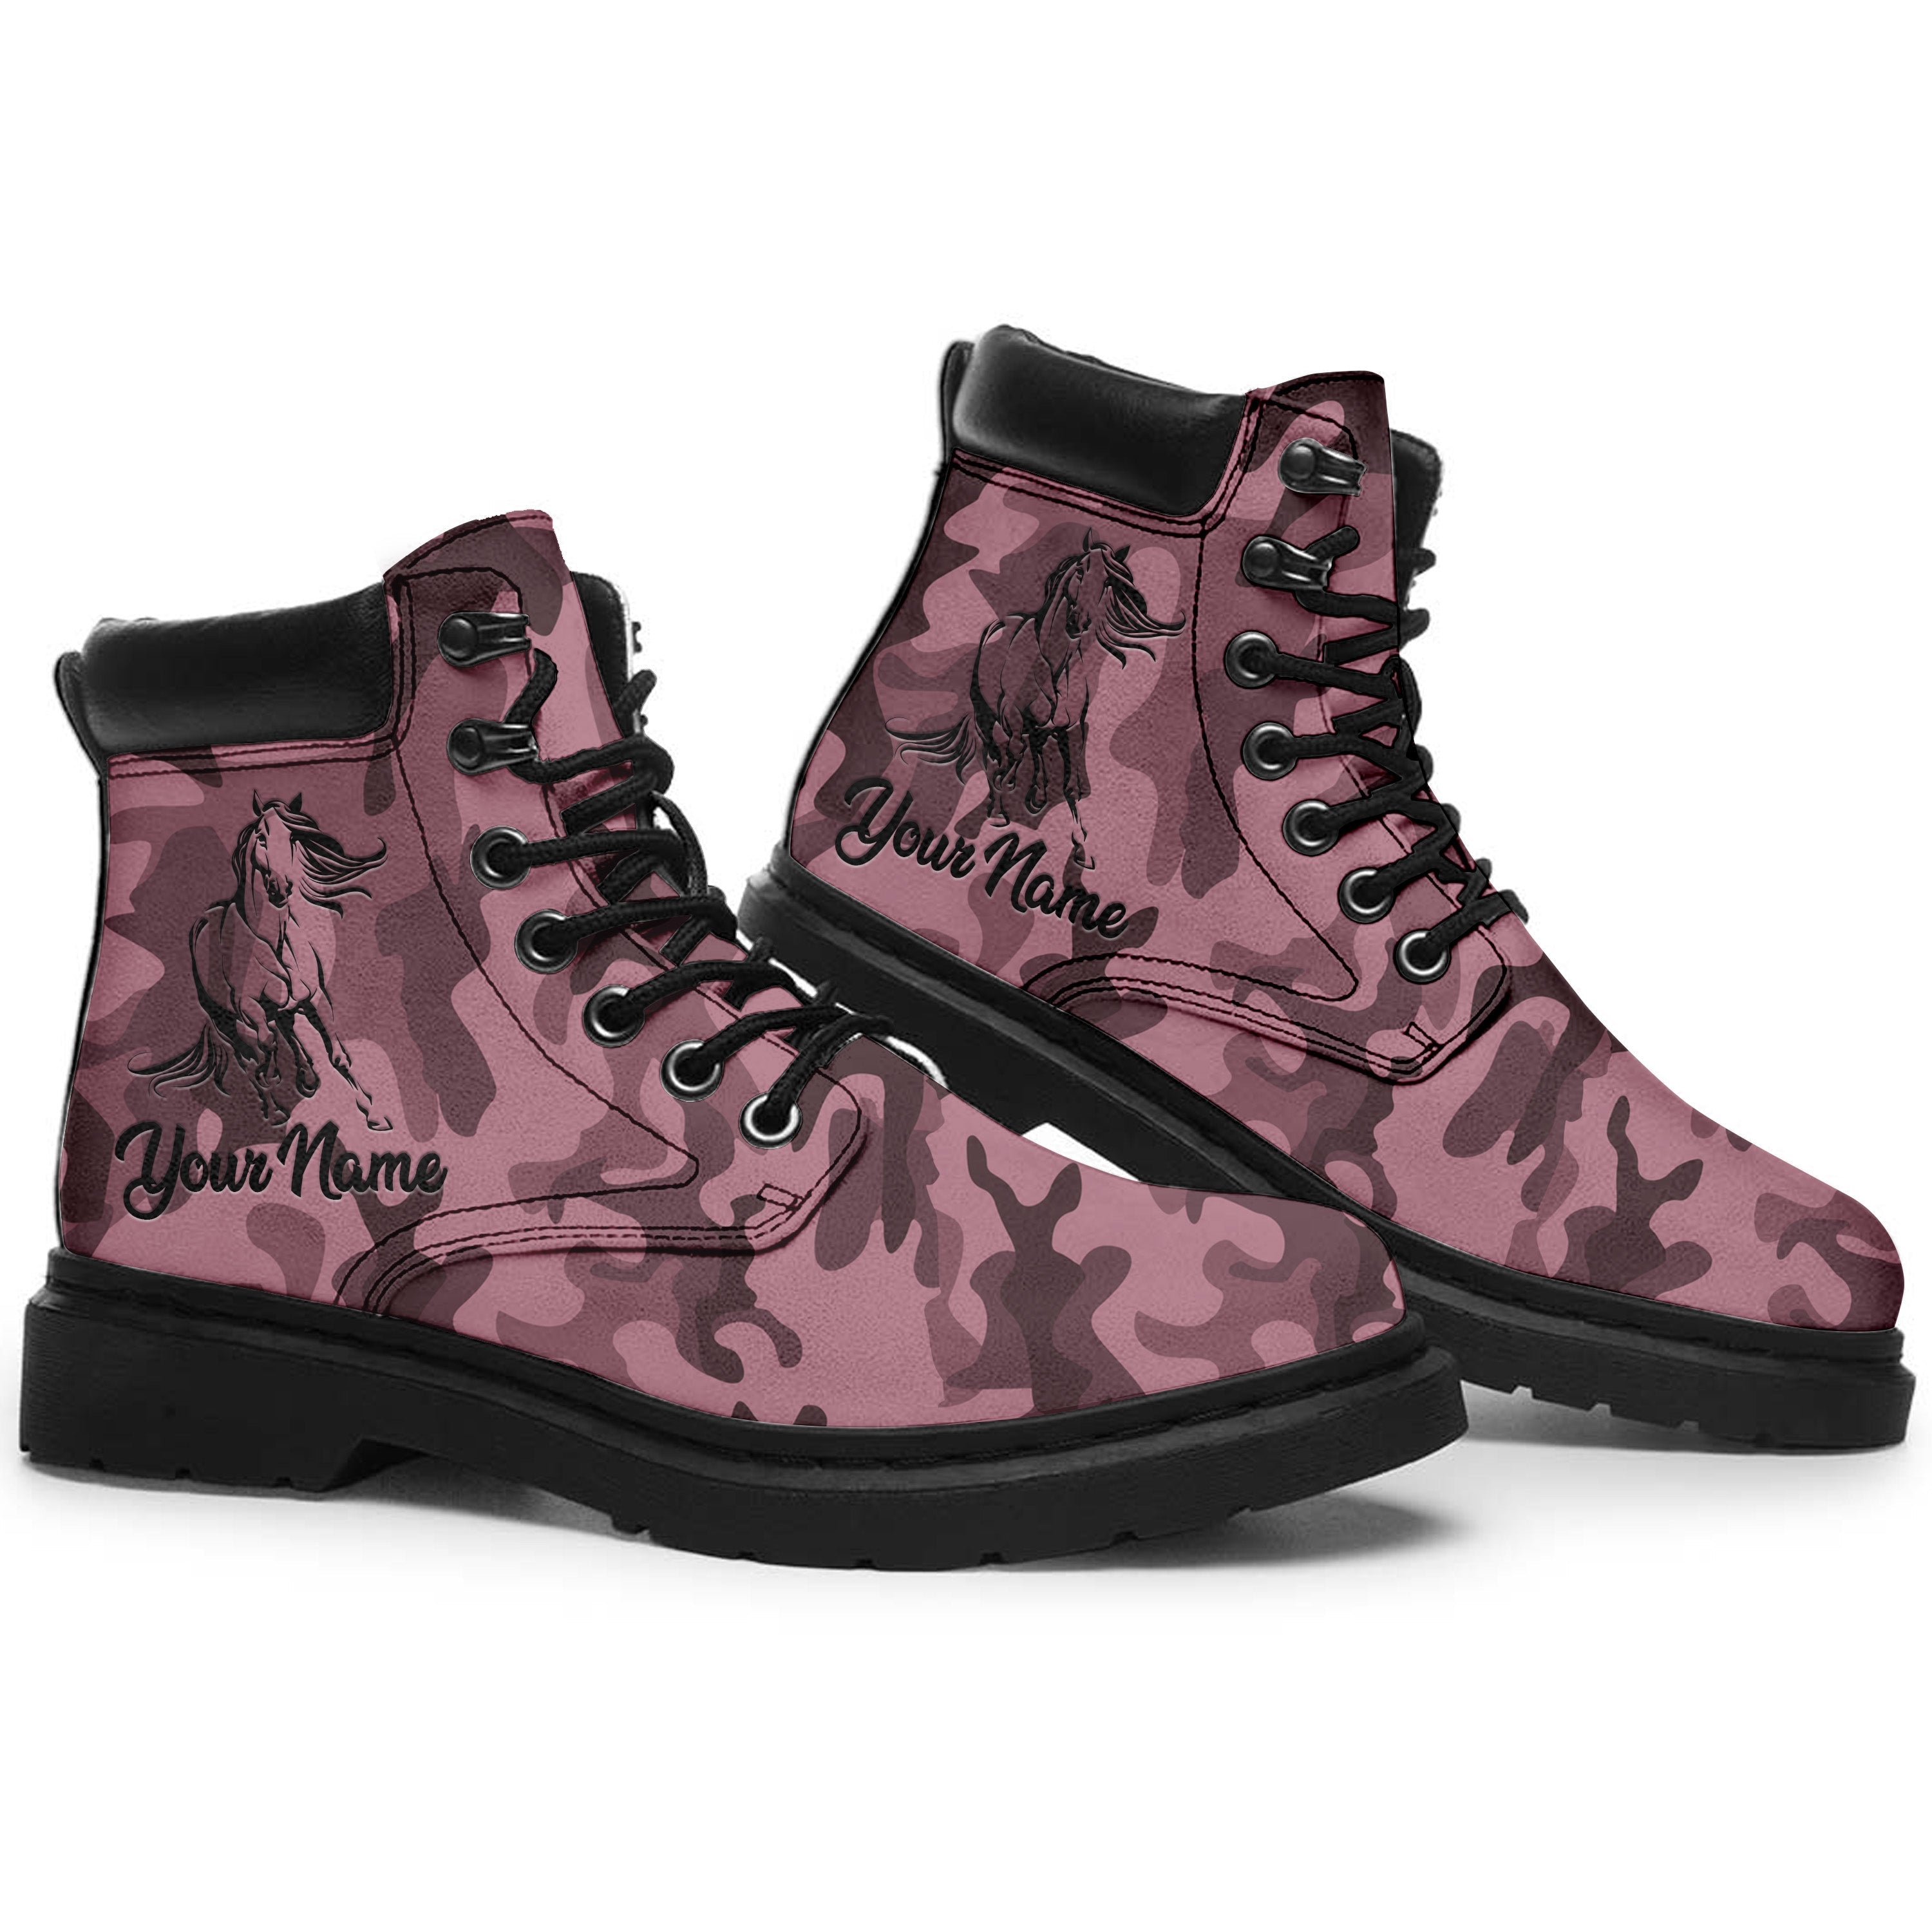 customized-name-pink-camo-horse-riding-boots-equestrian-boots-mens-womens-girl-horse-riding-boots-gift-for-horse-lovers-fishing-leather-boots